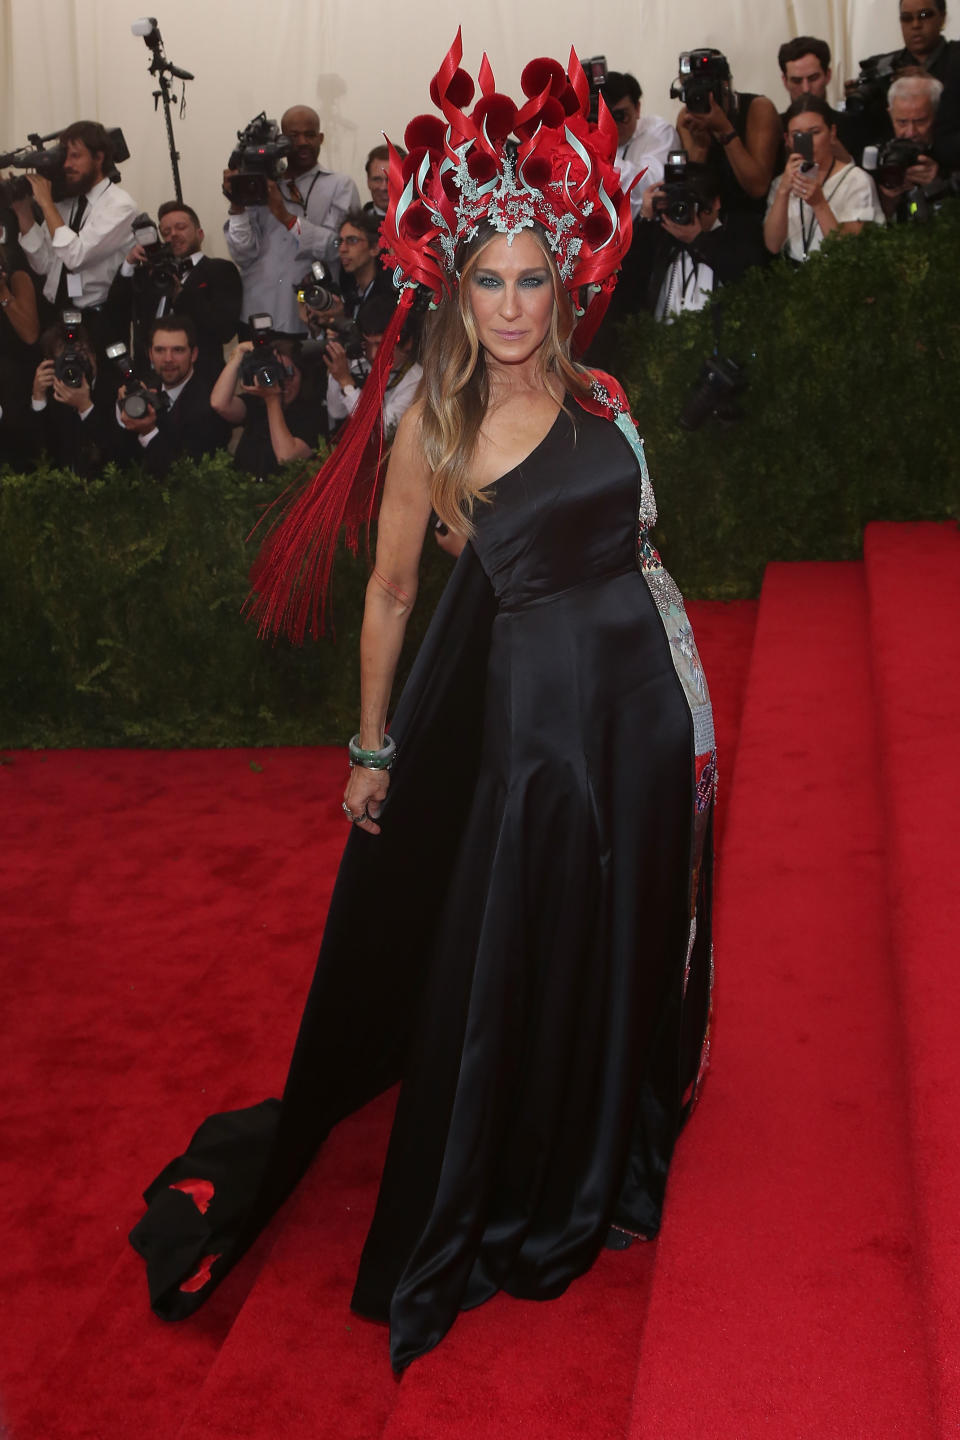 When Sarah Jessica Parker slayed in this headdress